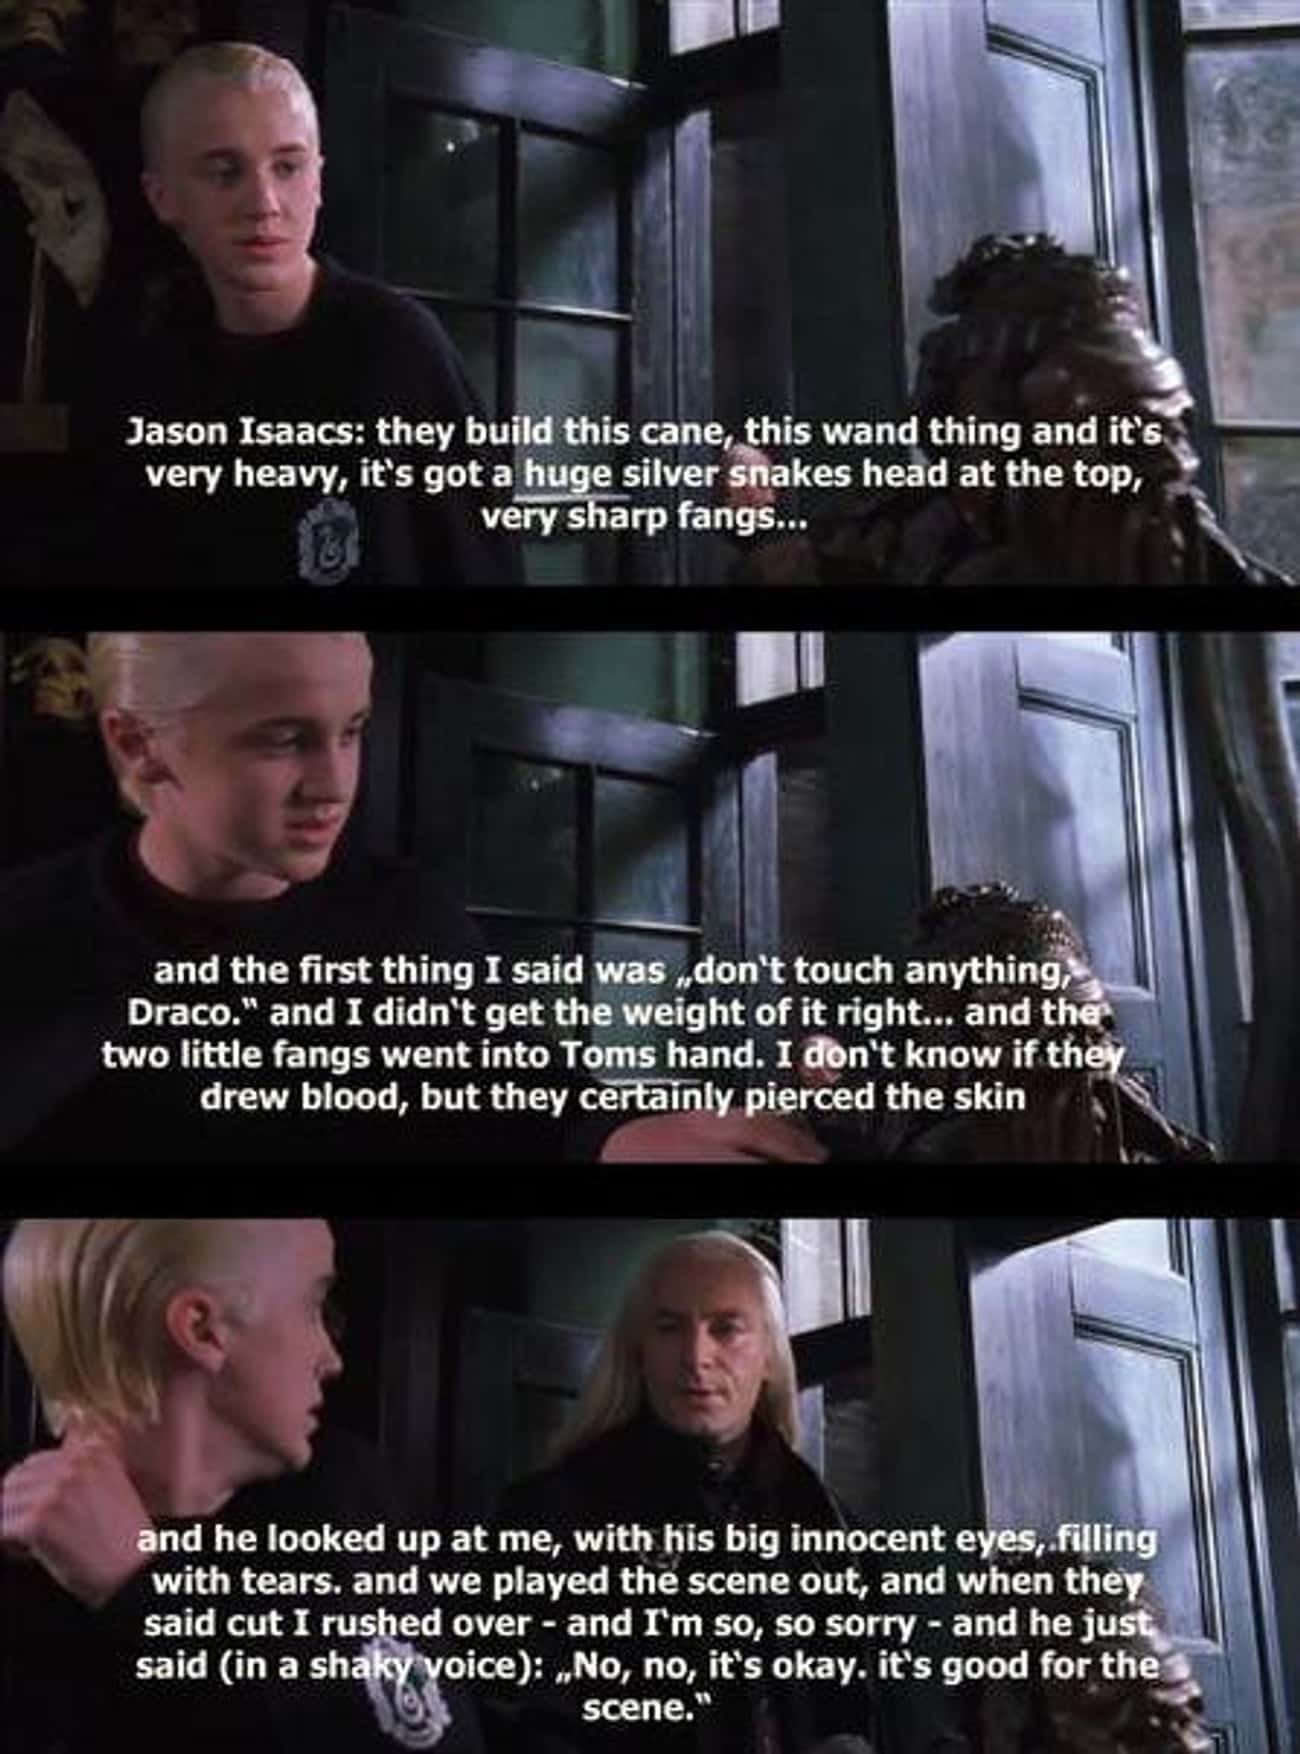 Lucius Actually Hurts Draco's Hand With A Cane in 'Chamber Of Secrets'